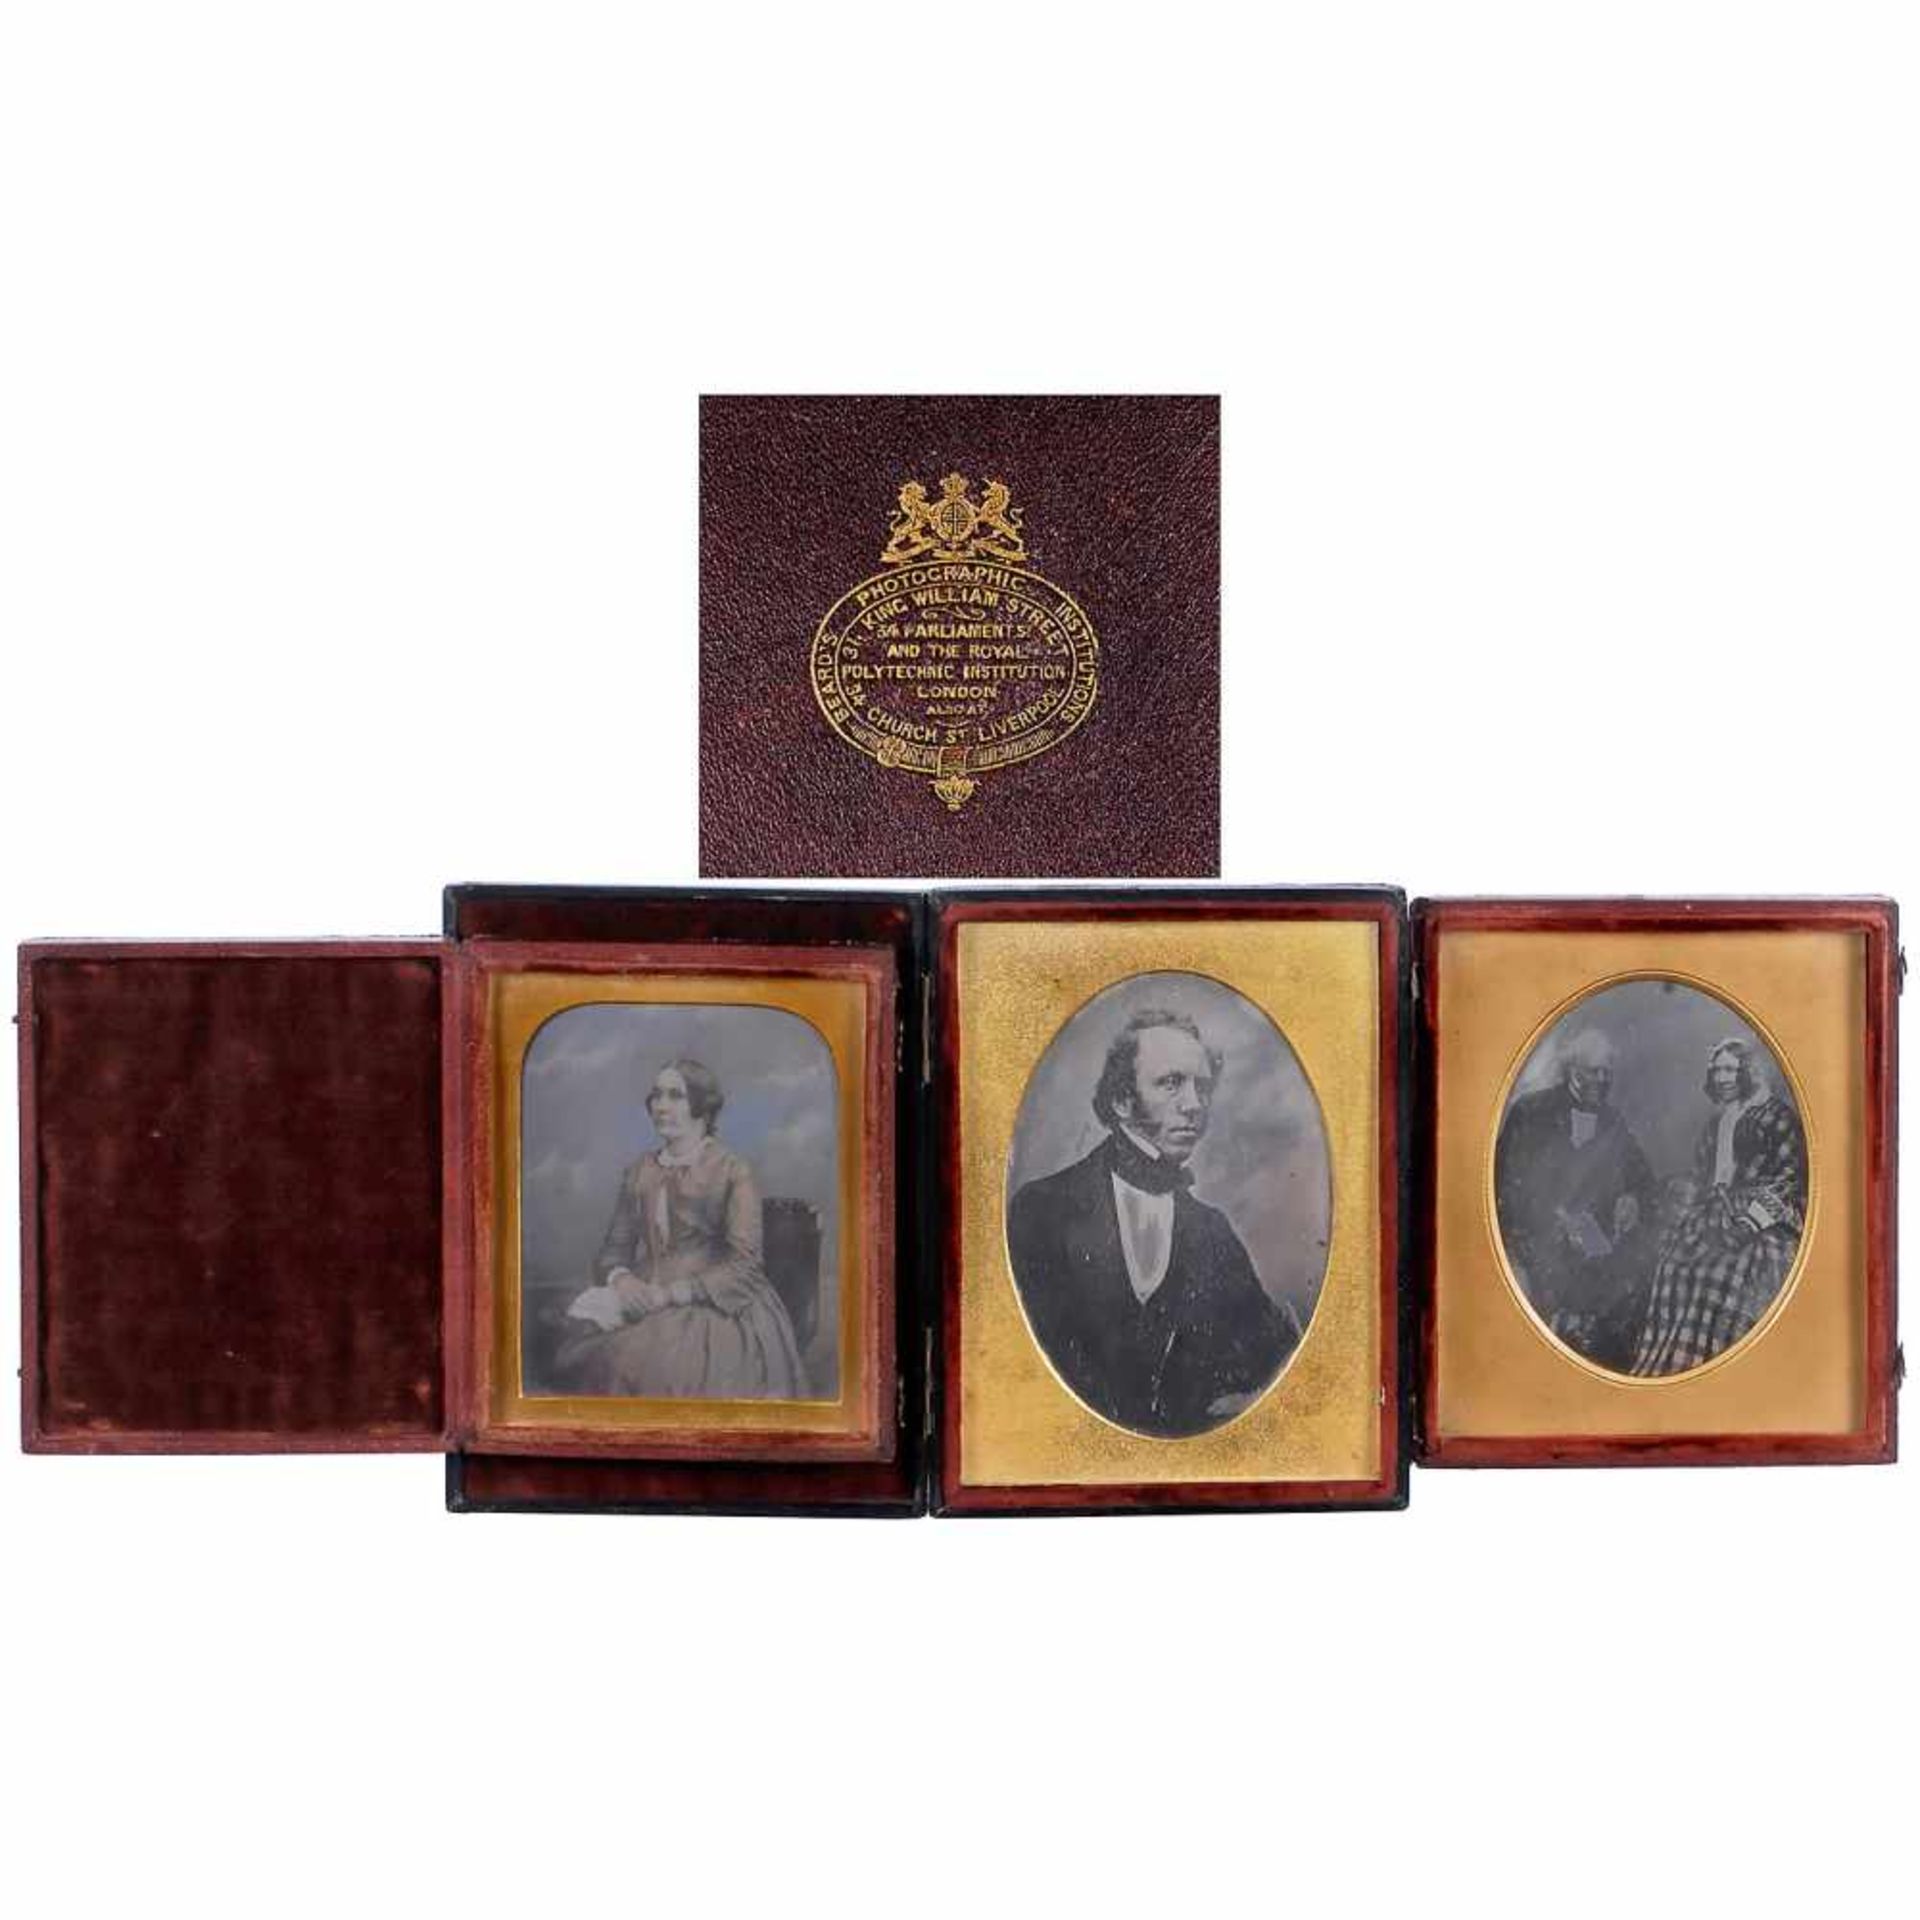 3 English Daguerreotypes by "Beard's", c. 1845Beard's Photographic Institutions London. 1) 1/6